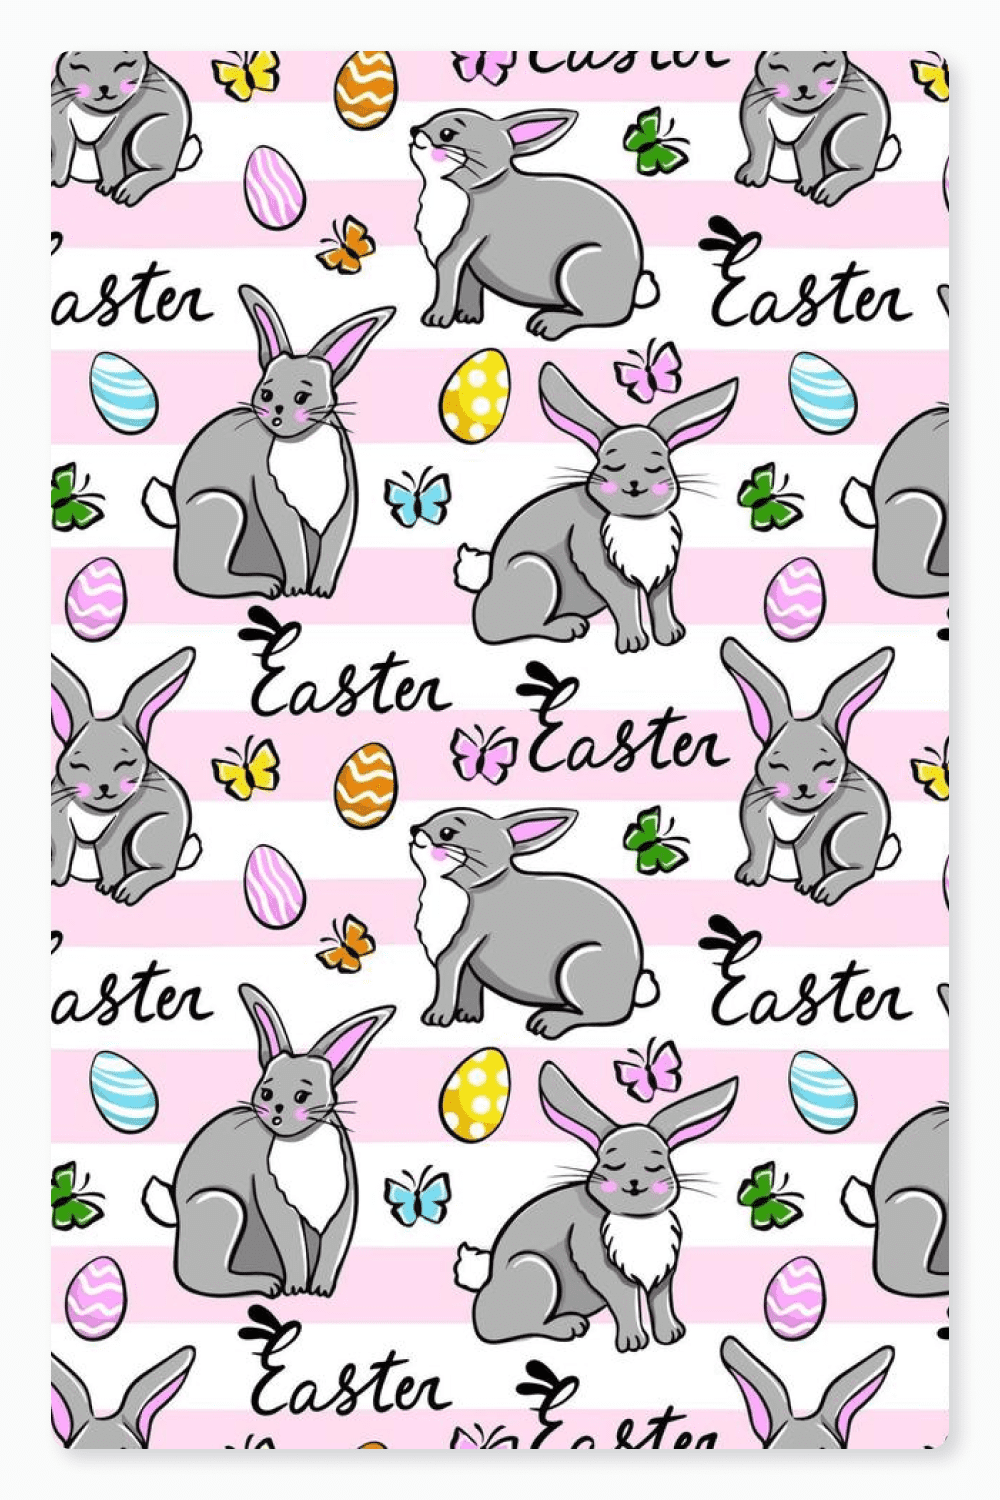 Collage of patterns depicting a rabbit, eggs and butterflies in different poses.